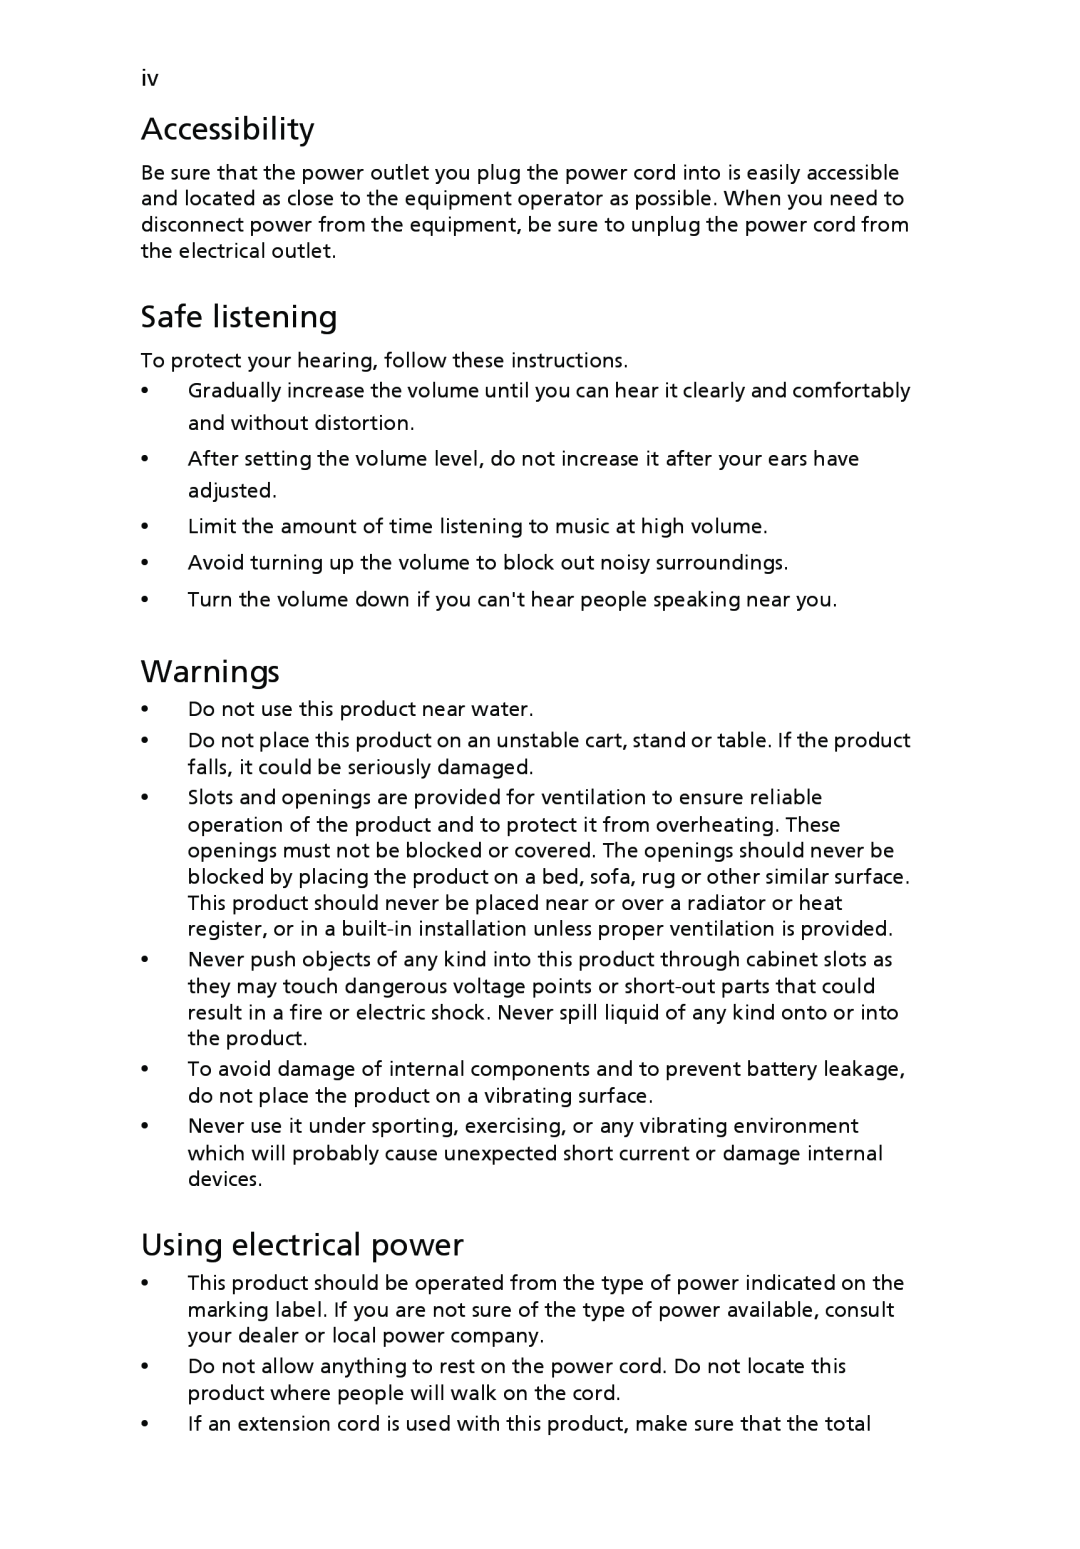 Acer V193L manual Accessibility, Safe listening, Warnings, Using electrical power 